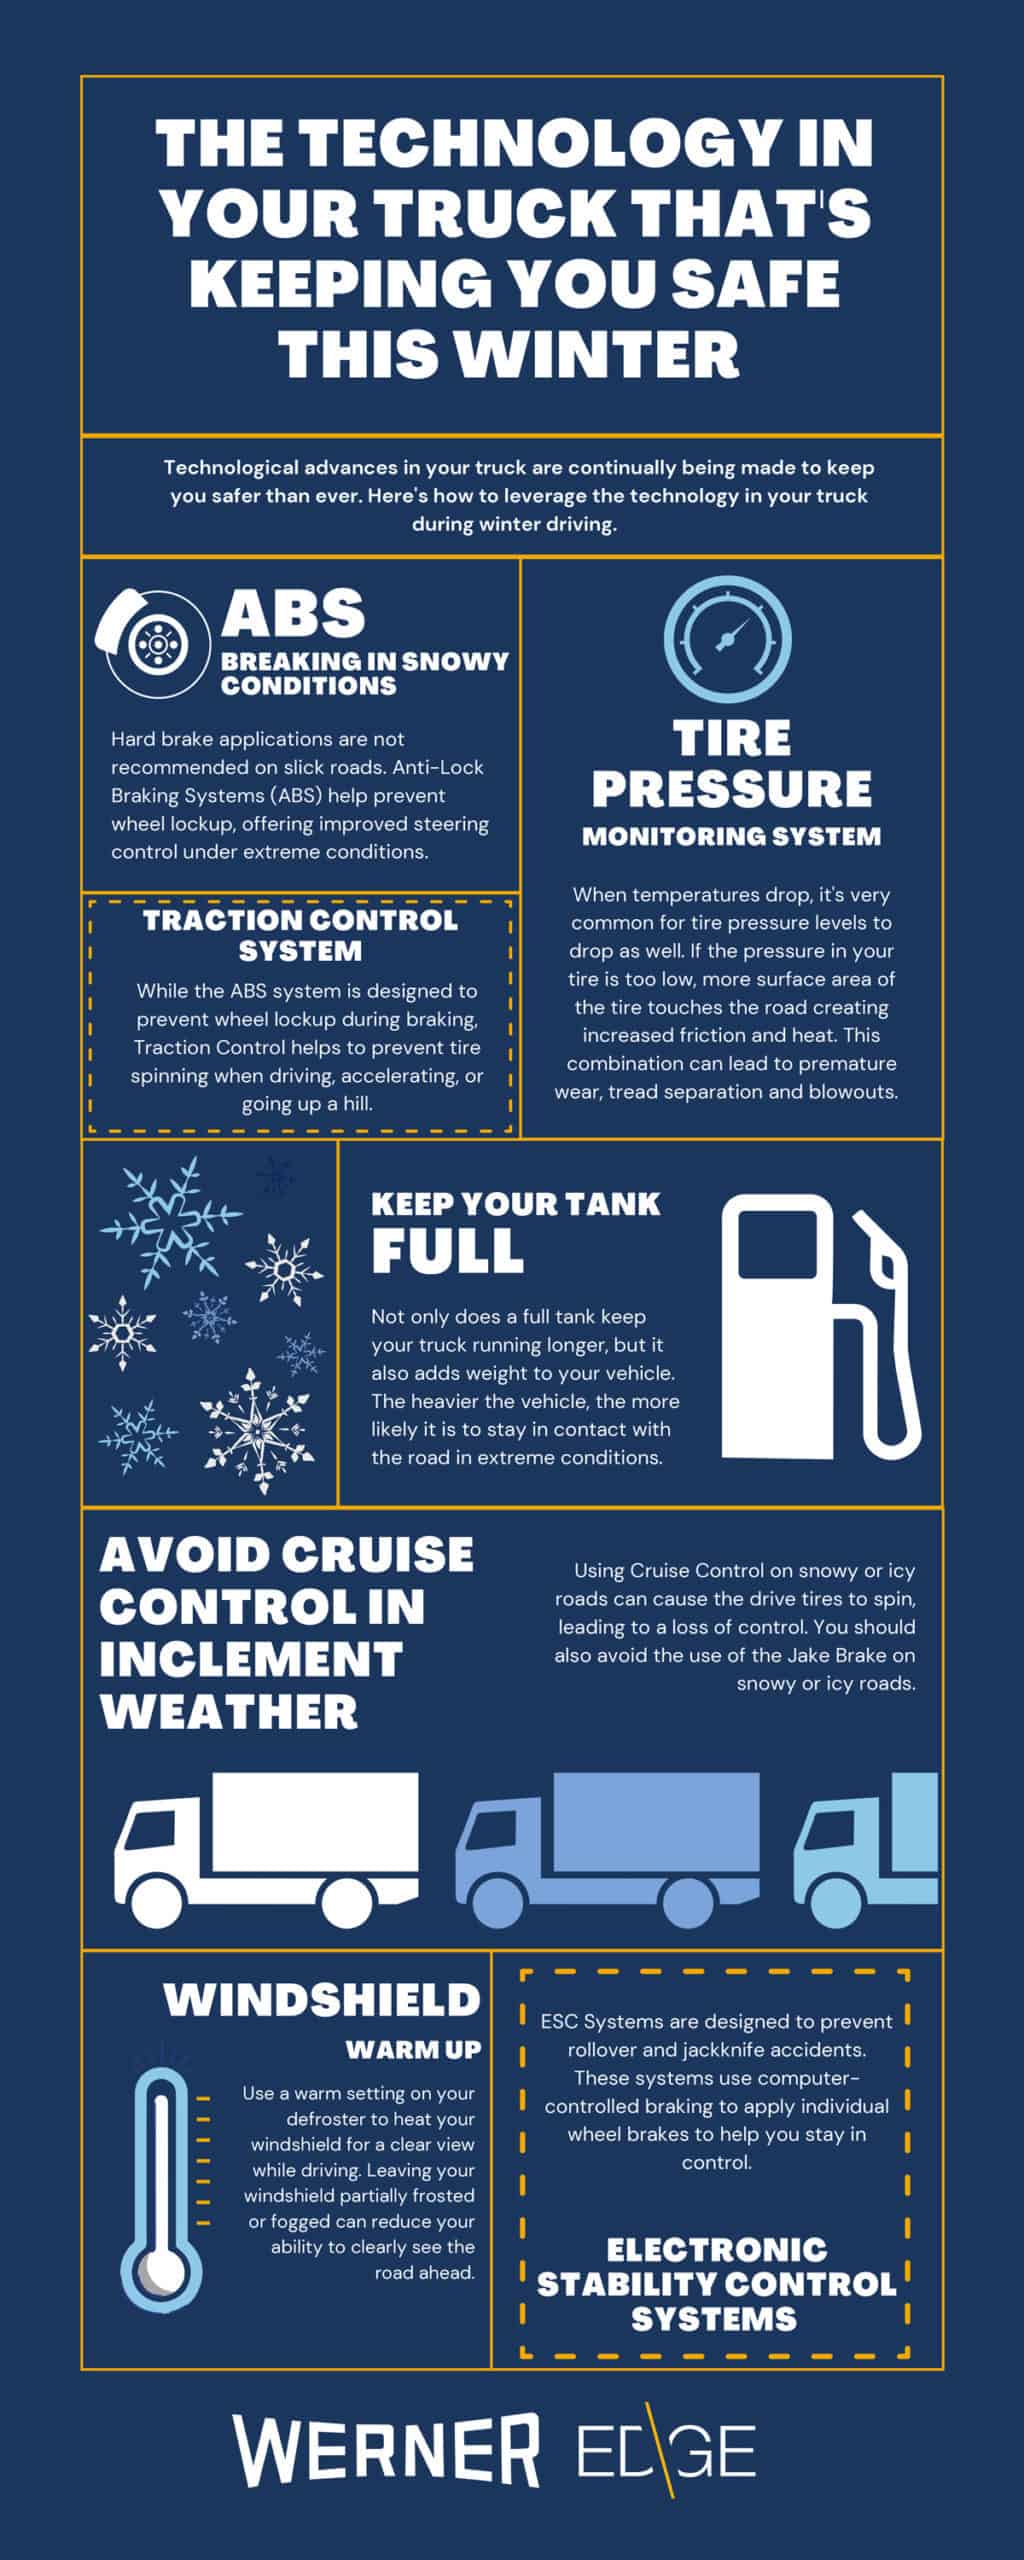 The Technology in Your Truck That's Keeping You Safe This Winter